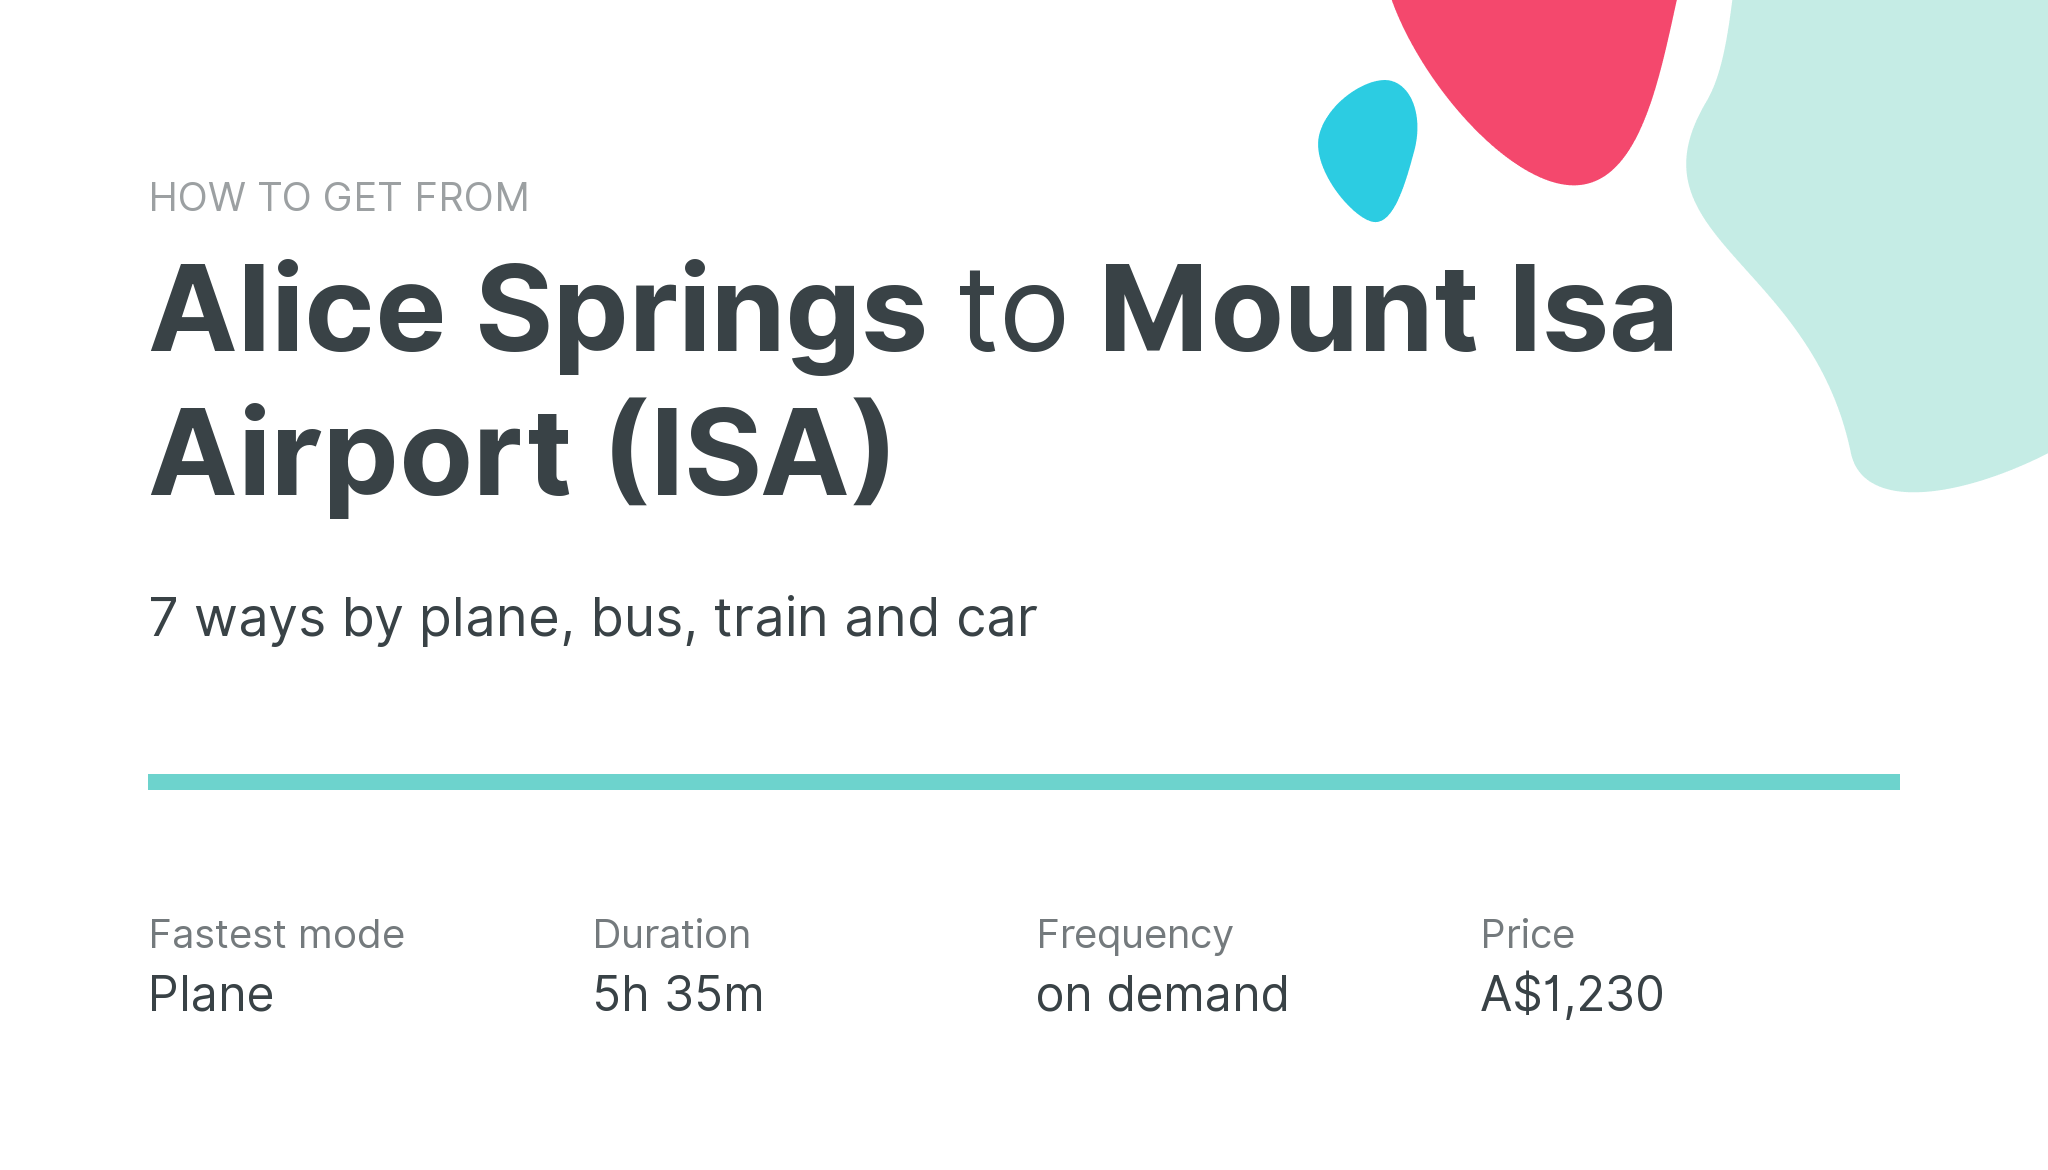 How do I get from Alice Springs to Mount Isa Airport (ISA)